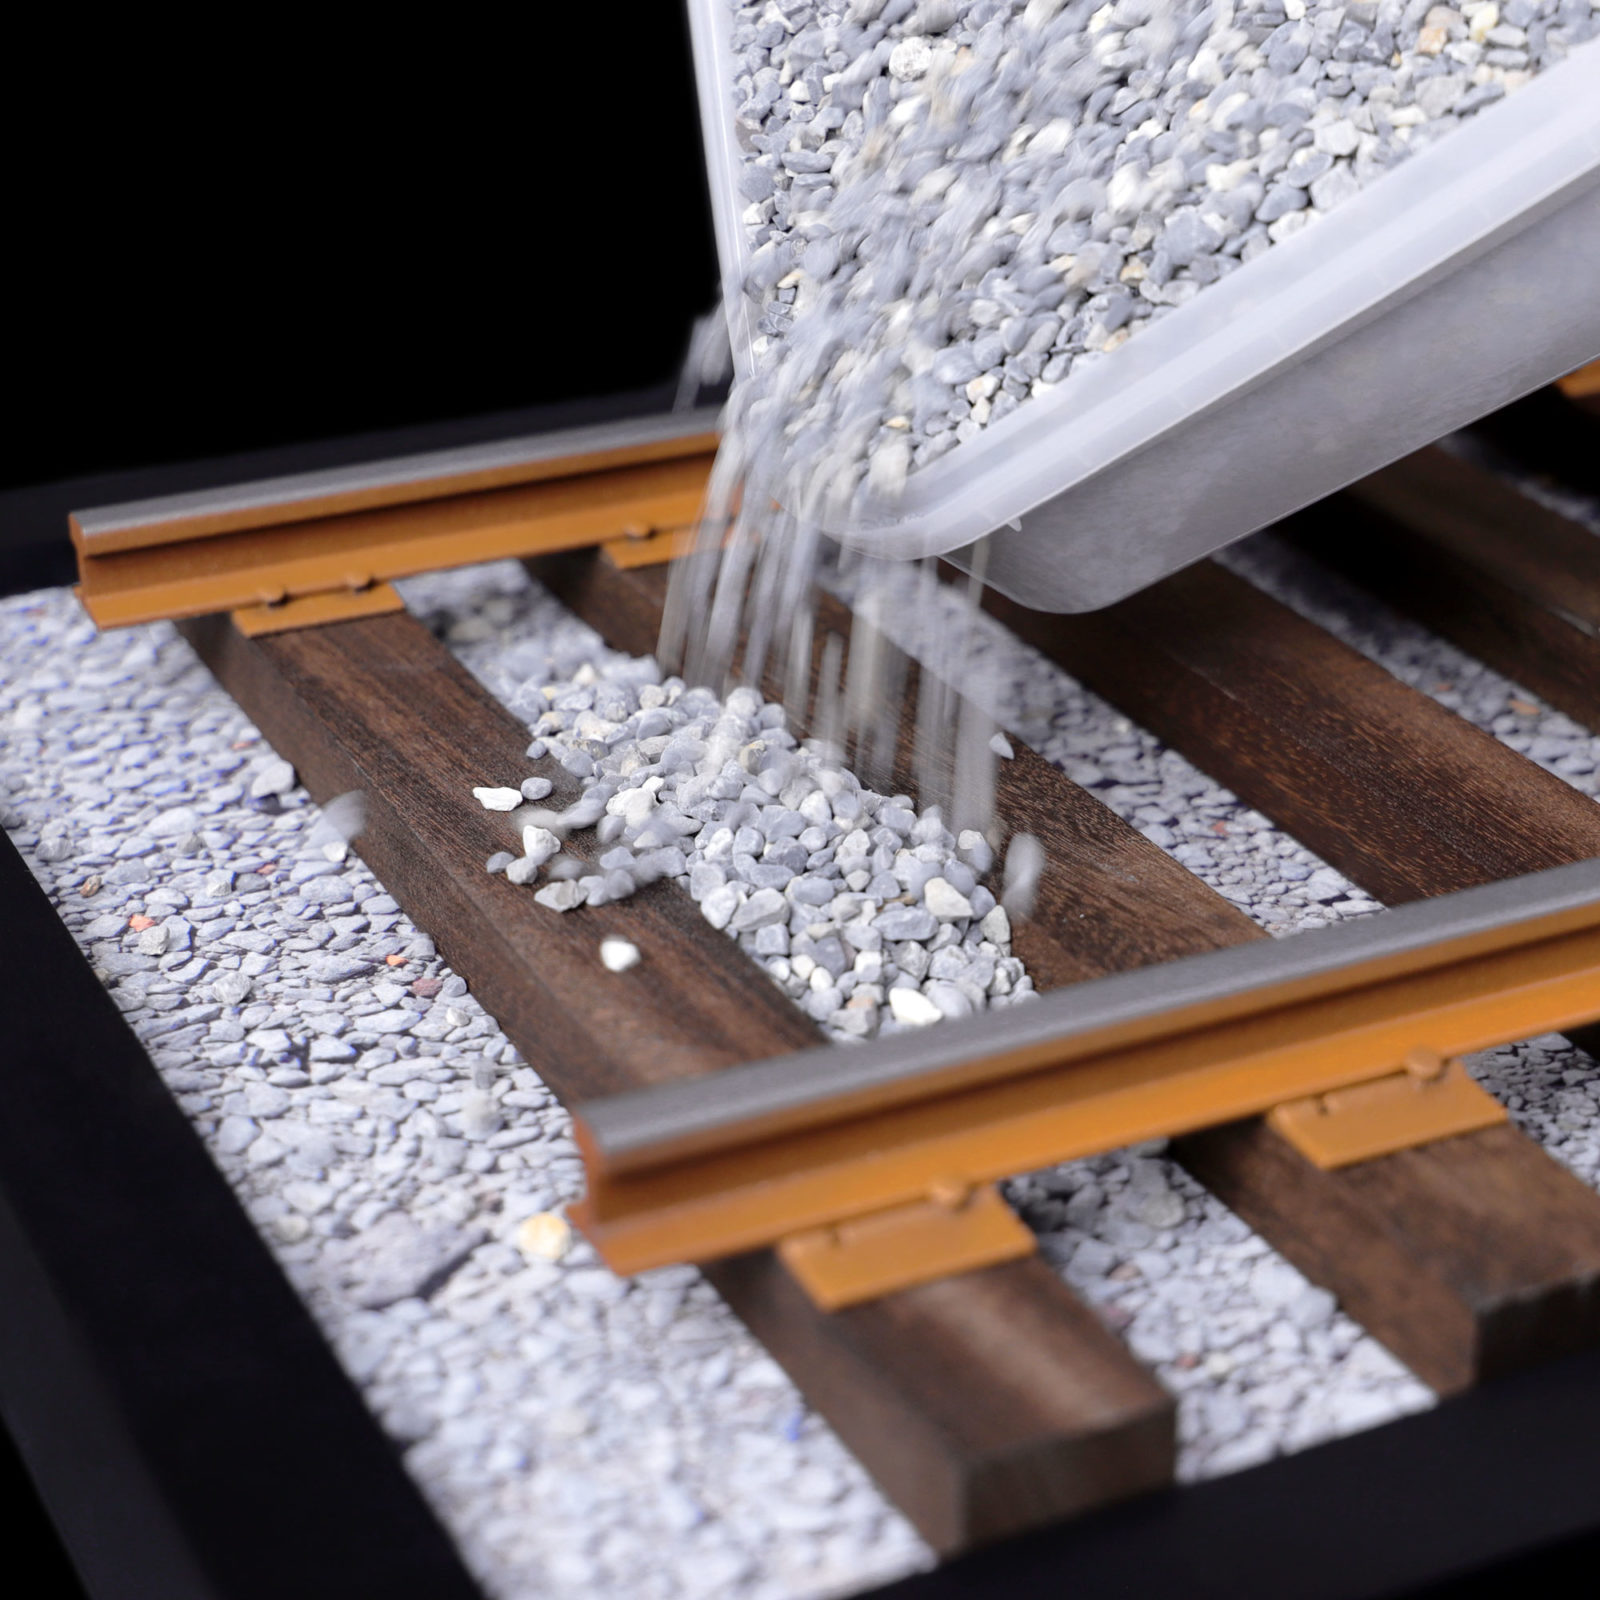 Pouring stone mix between tracks of DeLorean Railroad mod